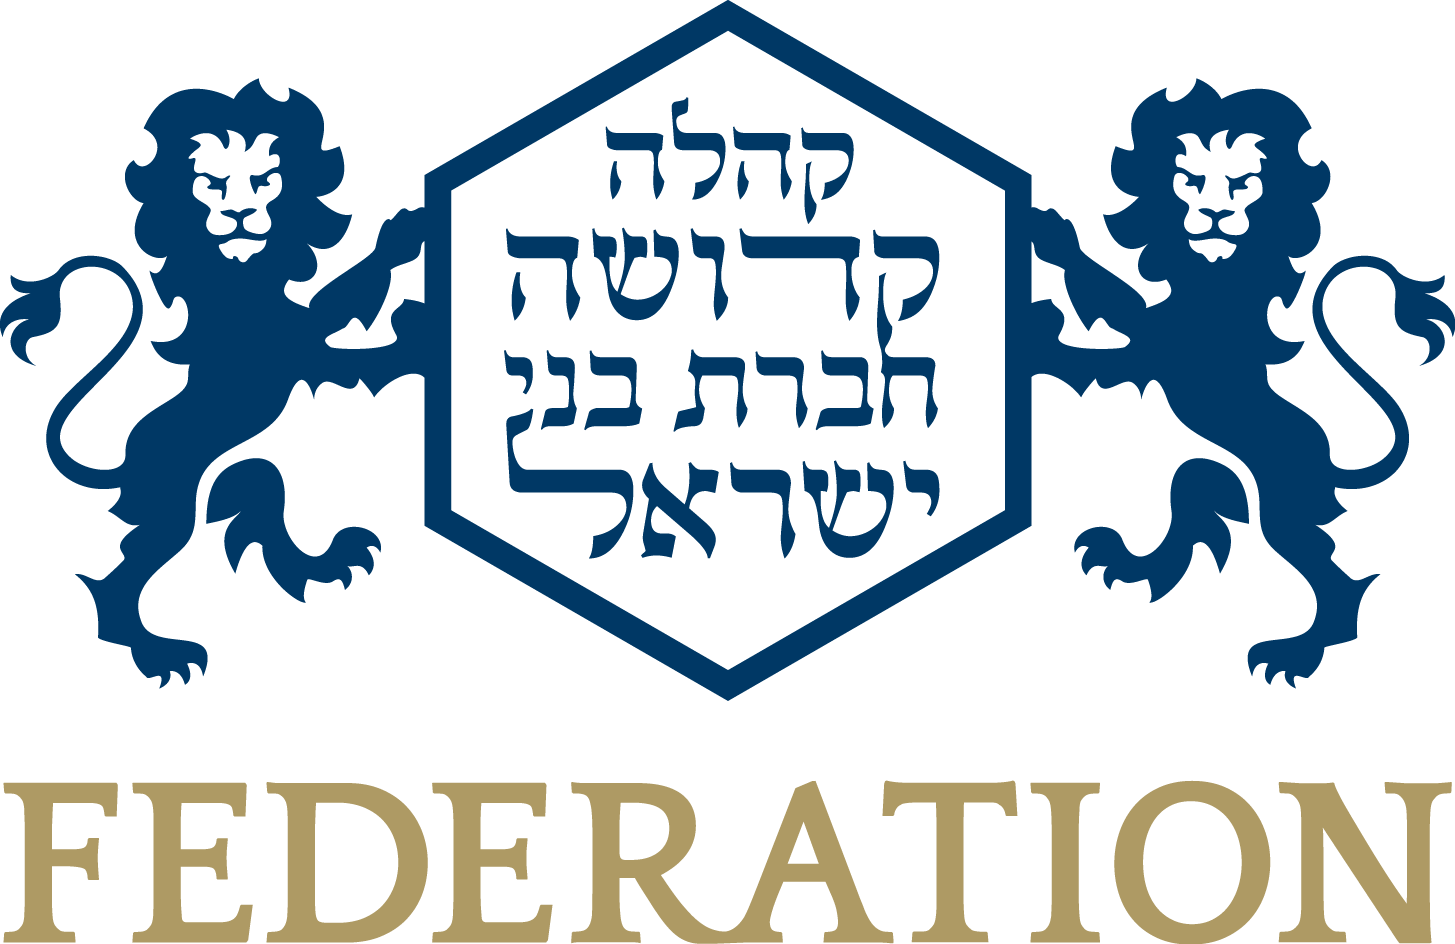 The Federation Logo - The Federation of Synagogues